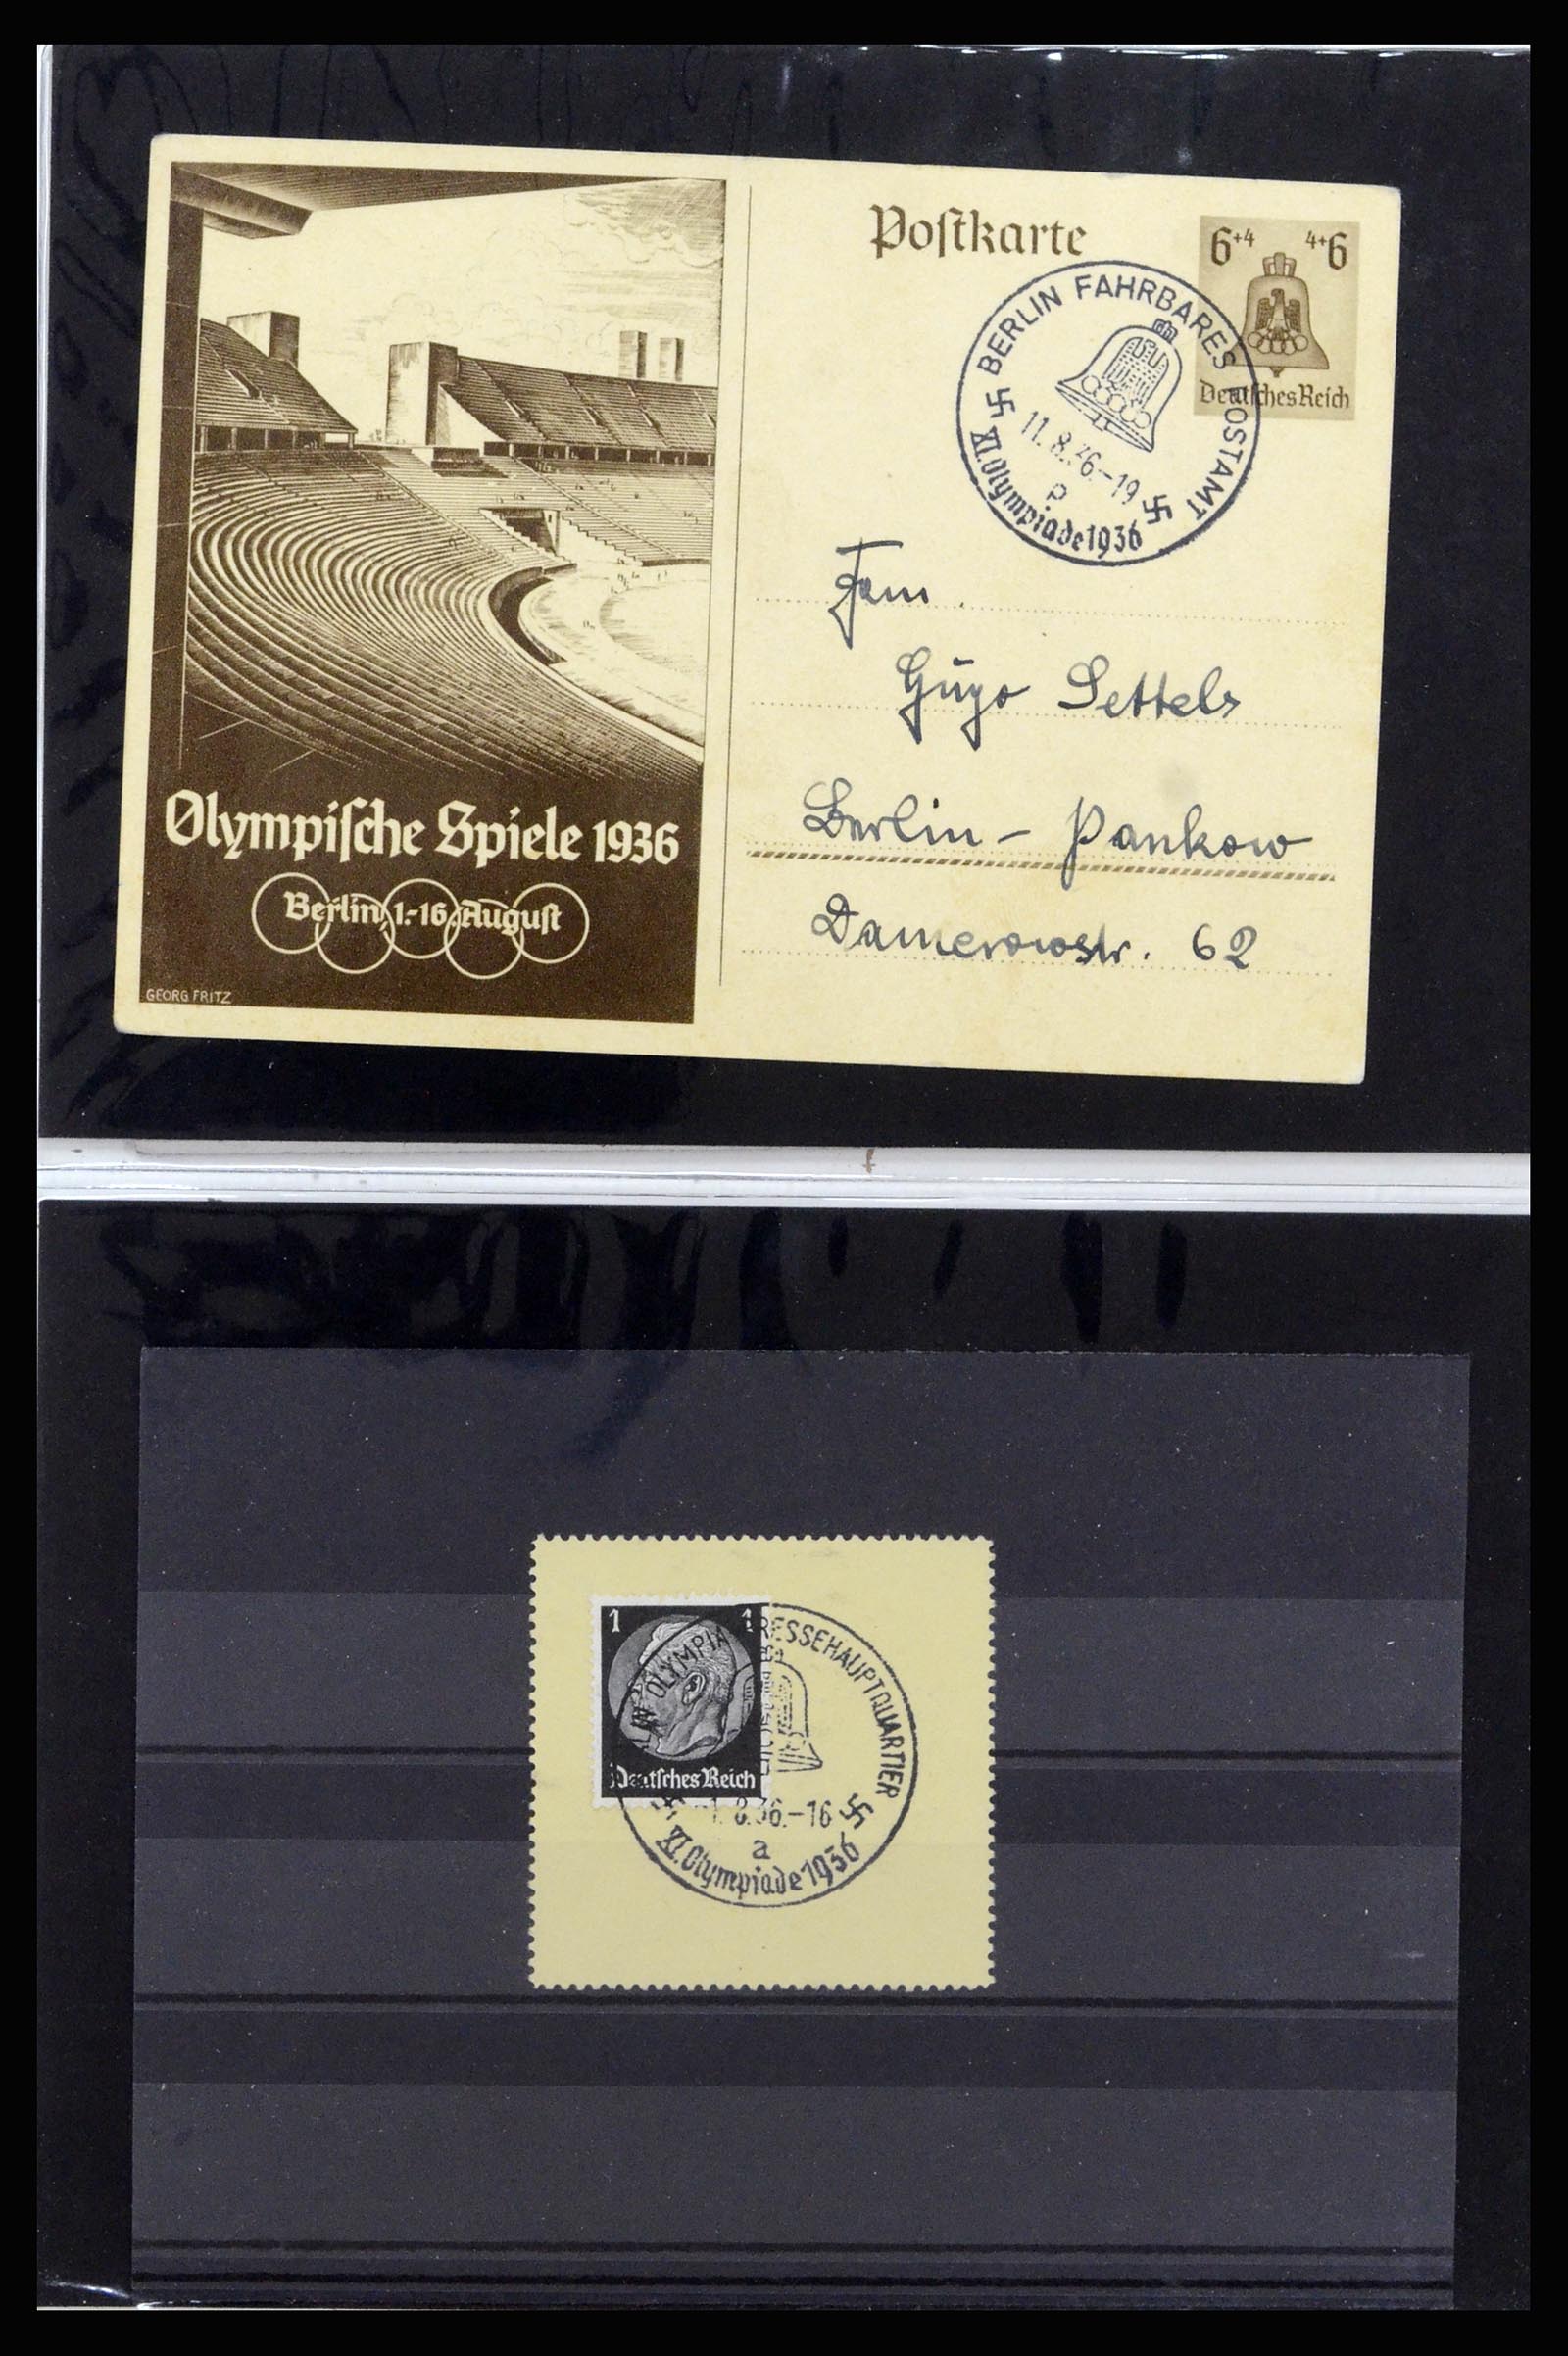 37118 100 - Stamp collection 37118 Olympics 1936.